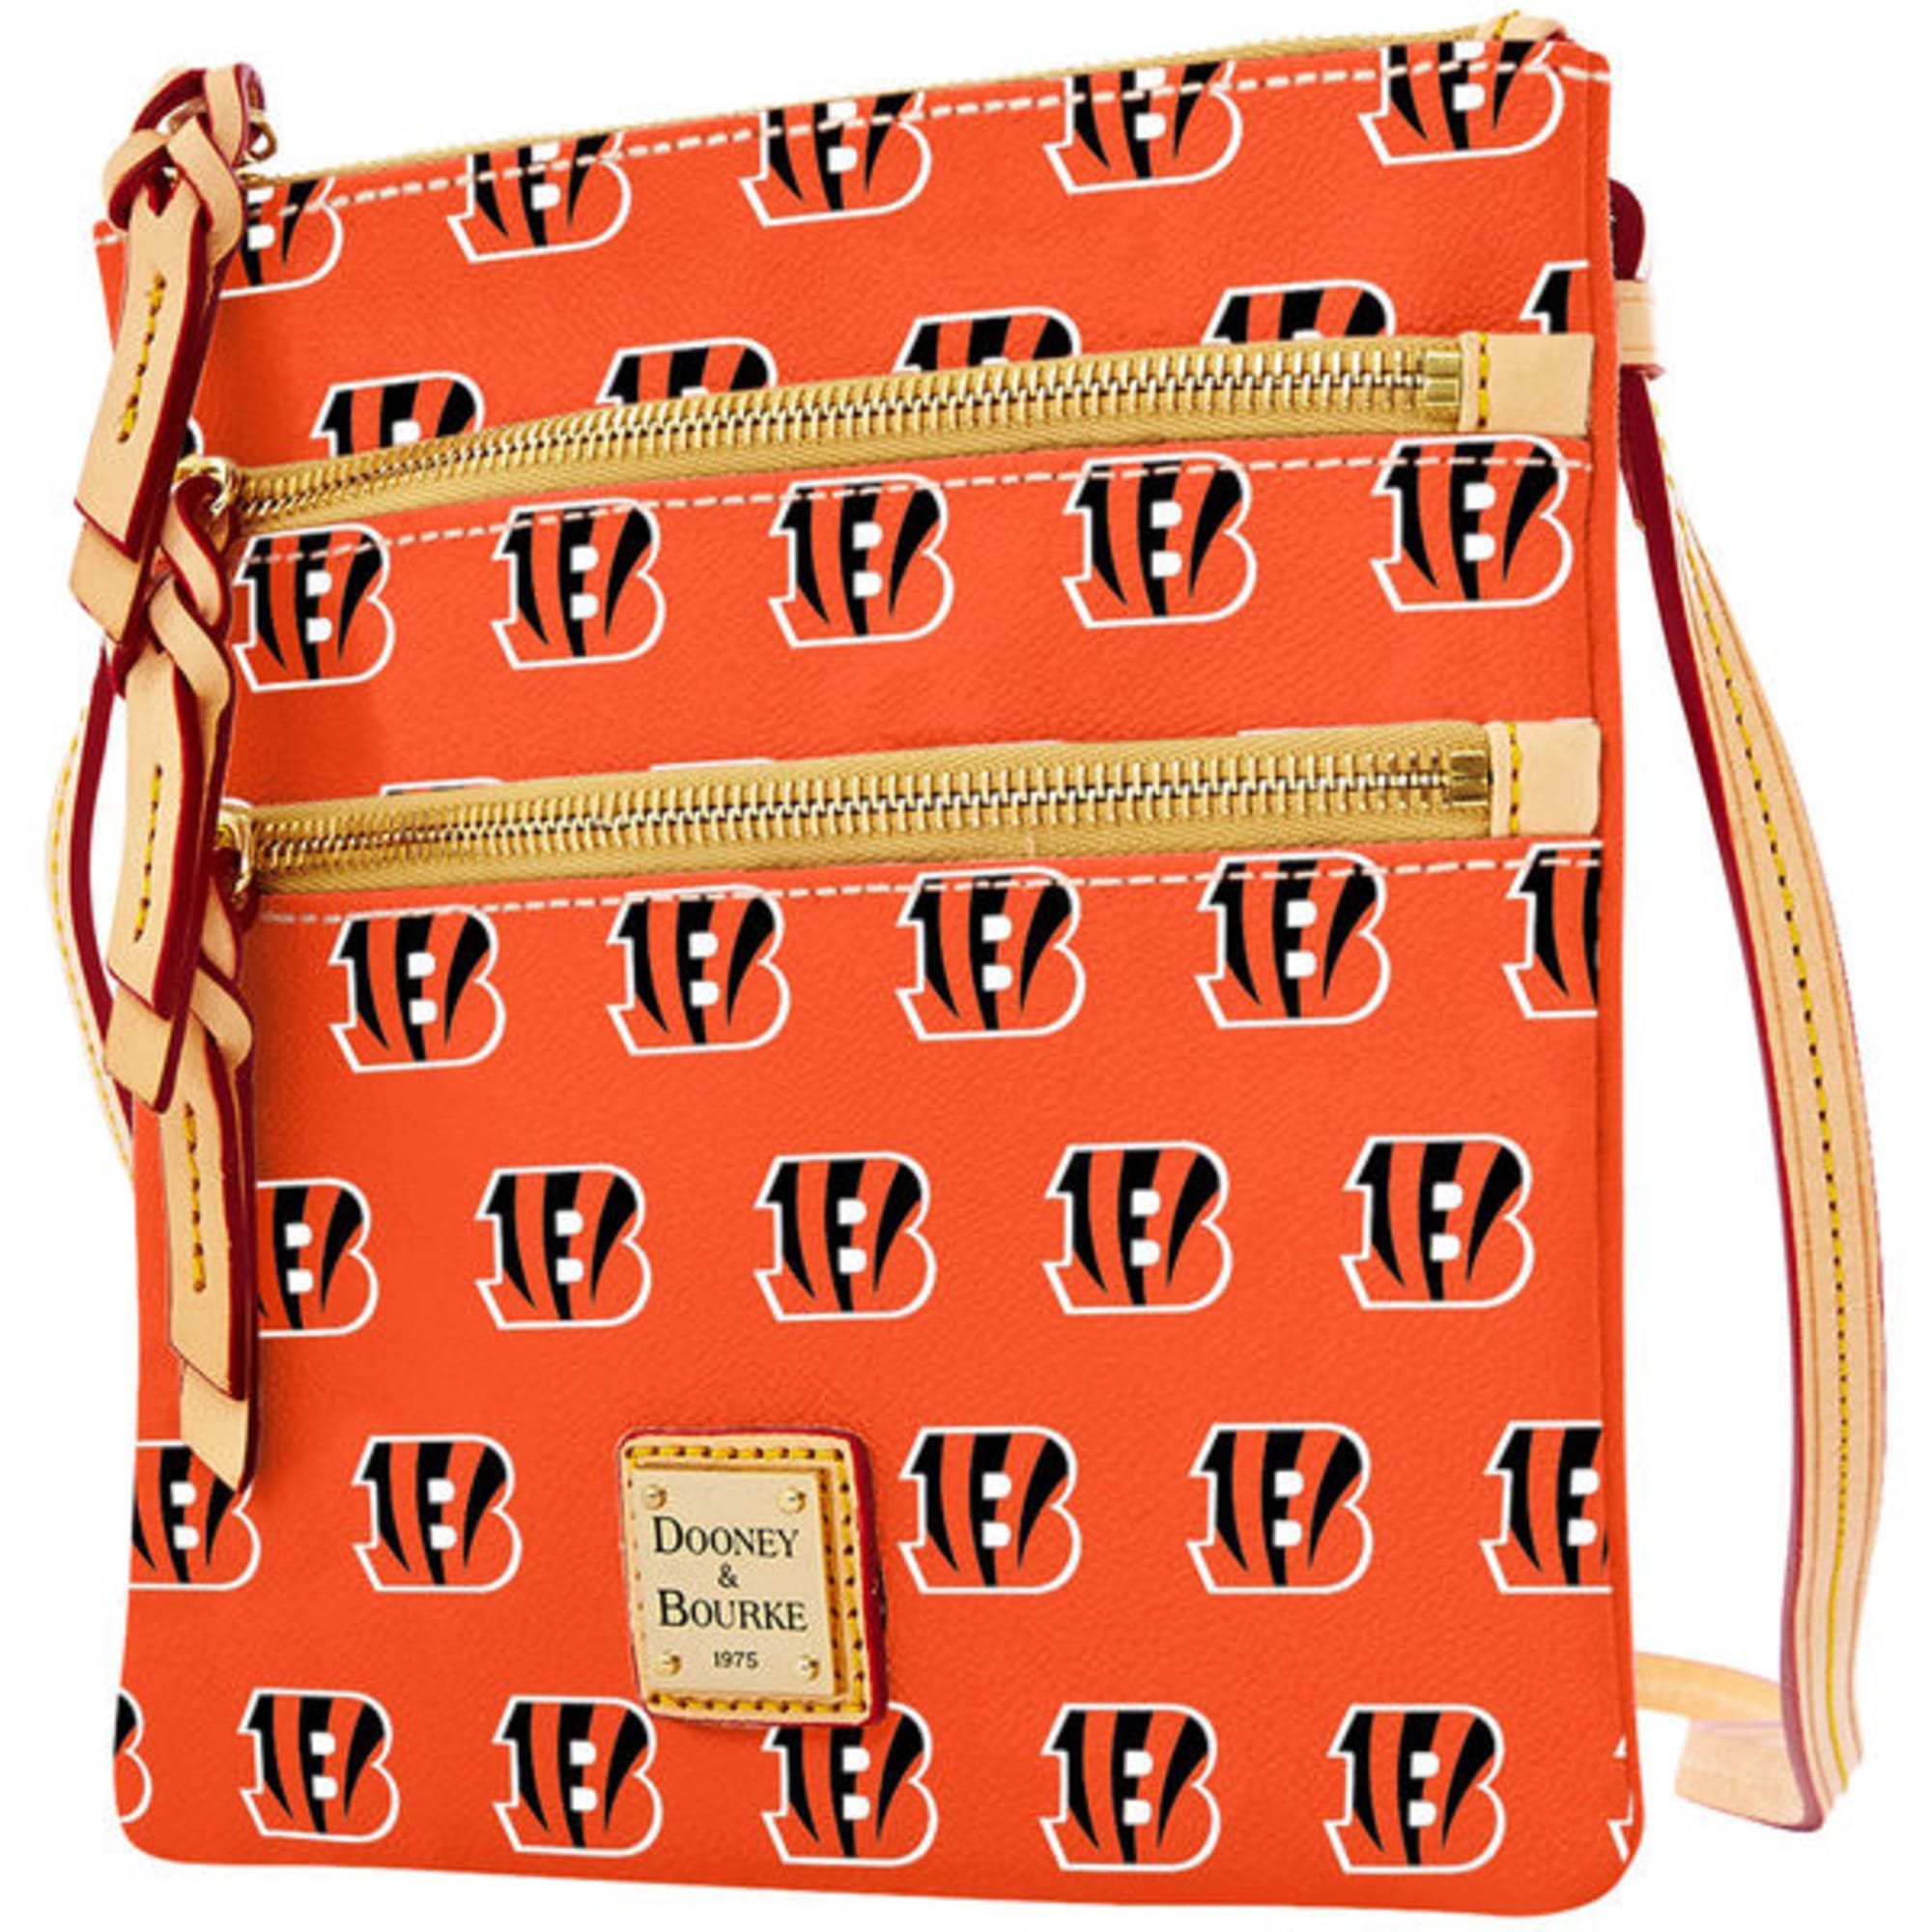 Cincinnati Bengals Gift Guide For Women: 10 must-have gifts